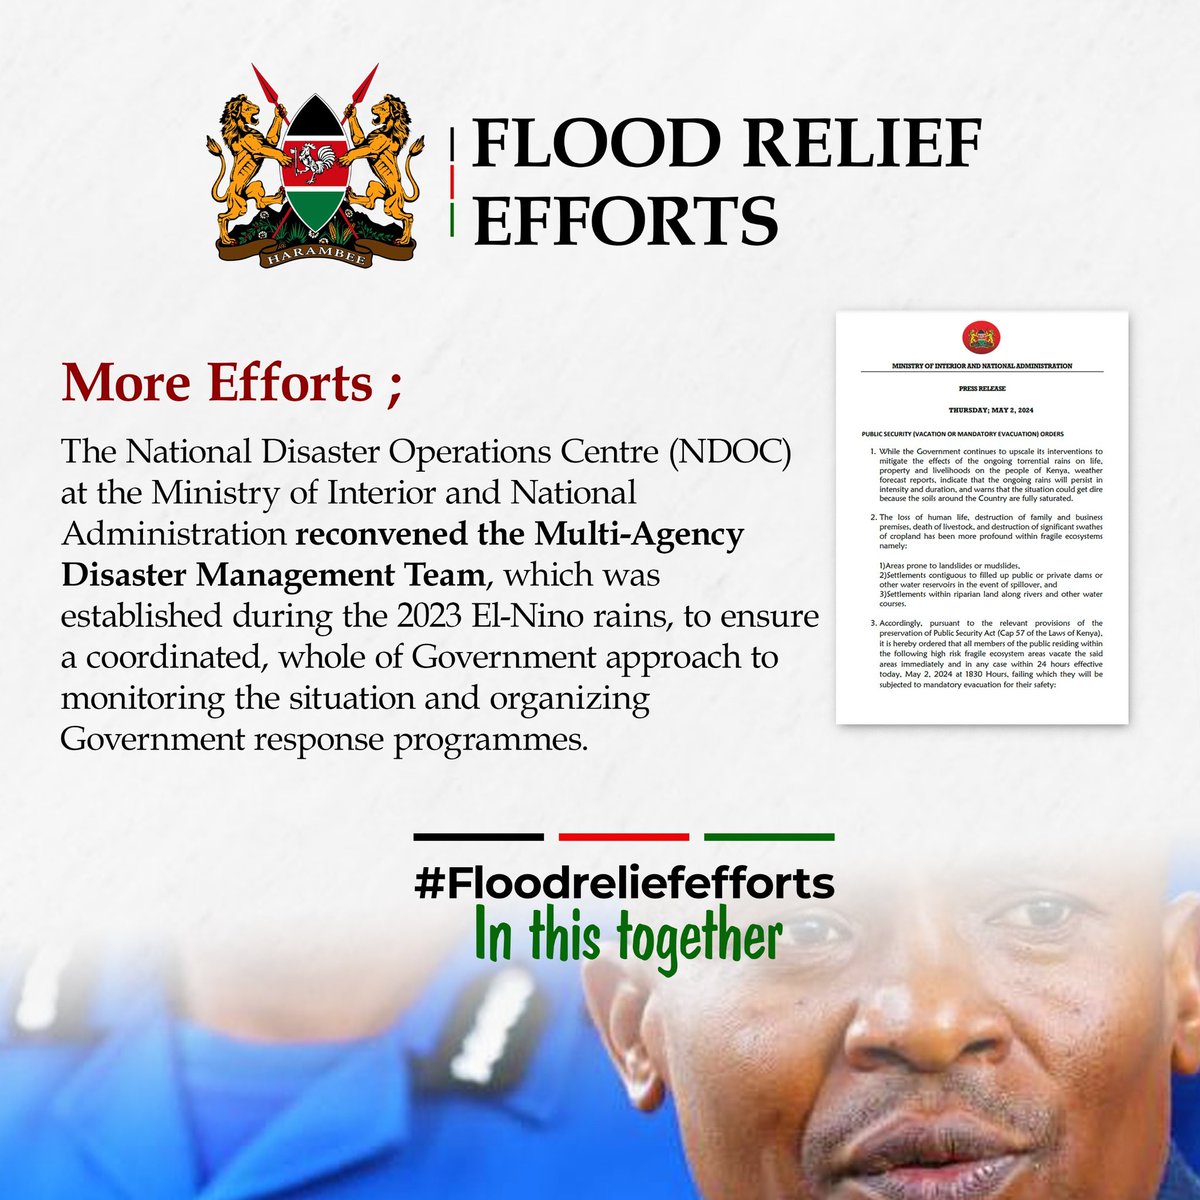 Government-led initiatives, in partnership with stakeholders, prioritize providing essential aid to citizens impacted by floods, mudslides, and landslides, ensuring their basic needs are met.#FloodReliefEfforts
In It Together